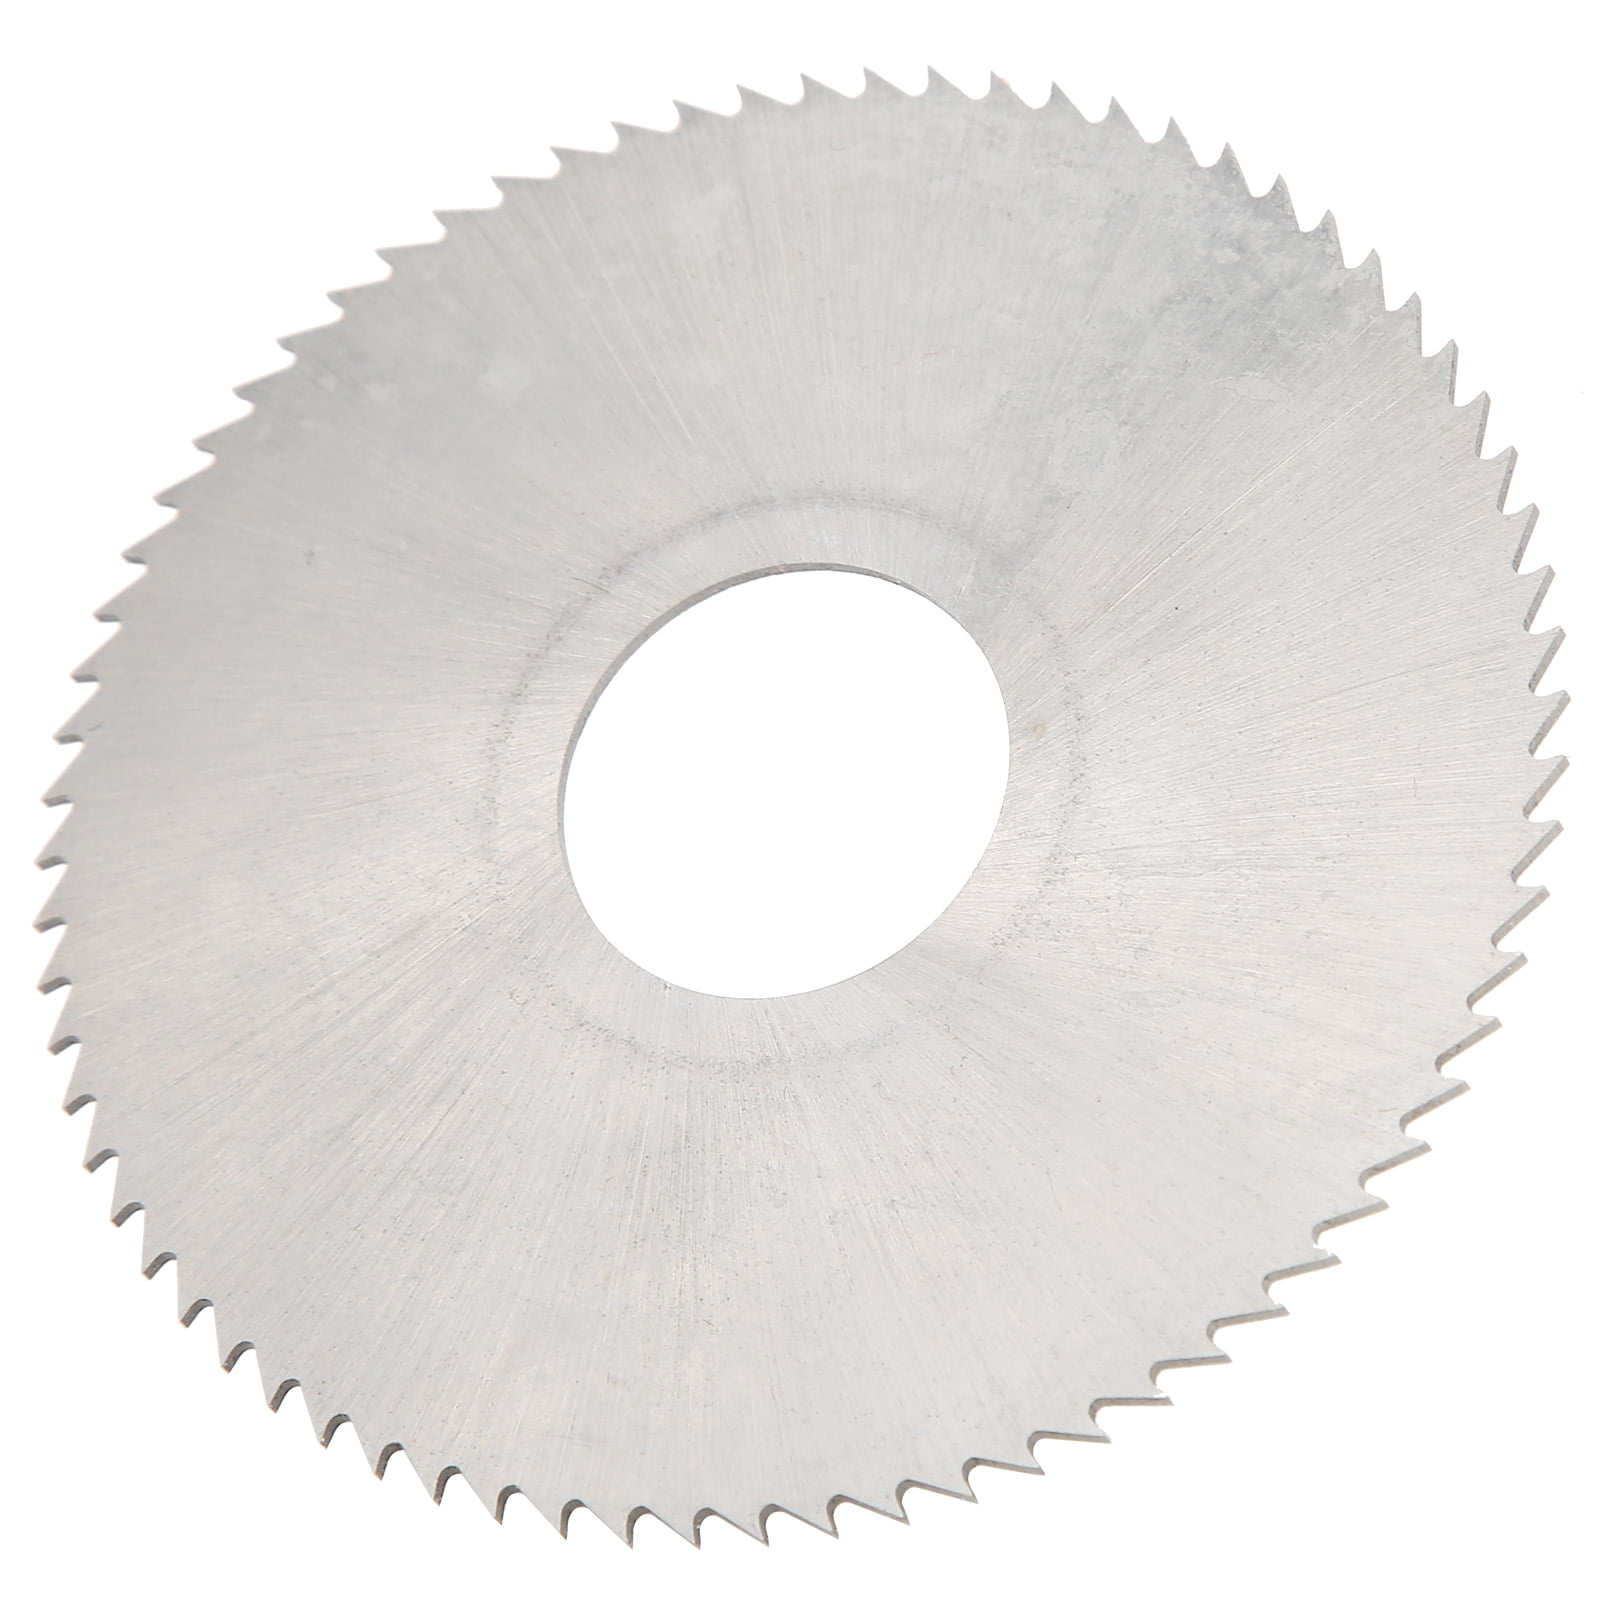 Details about   NEW WAGNER 16.5" X 72 TOOTH SEGMENTAL COLD SAW BLADE 50MM BORE 4 PINHOLES 